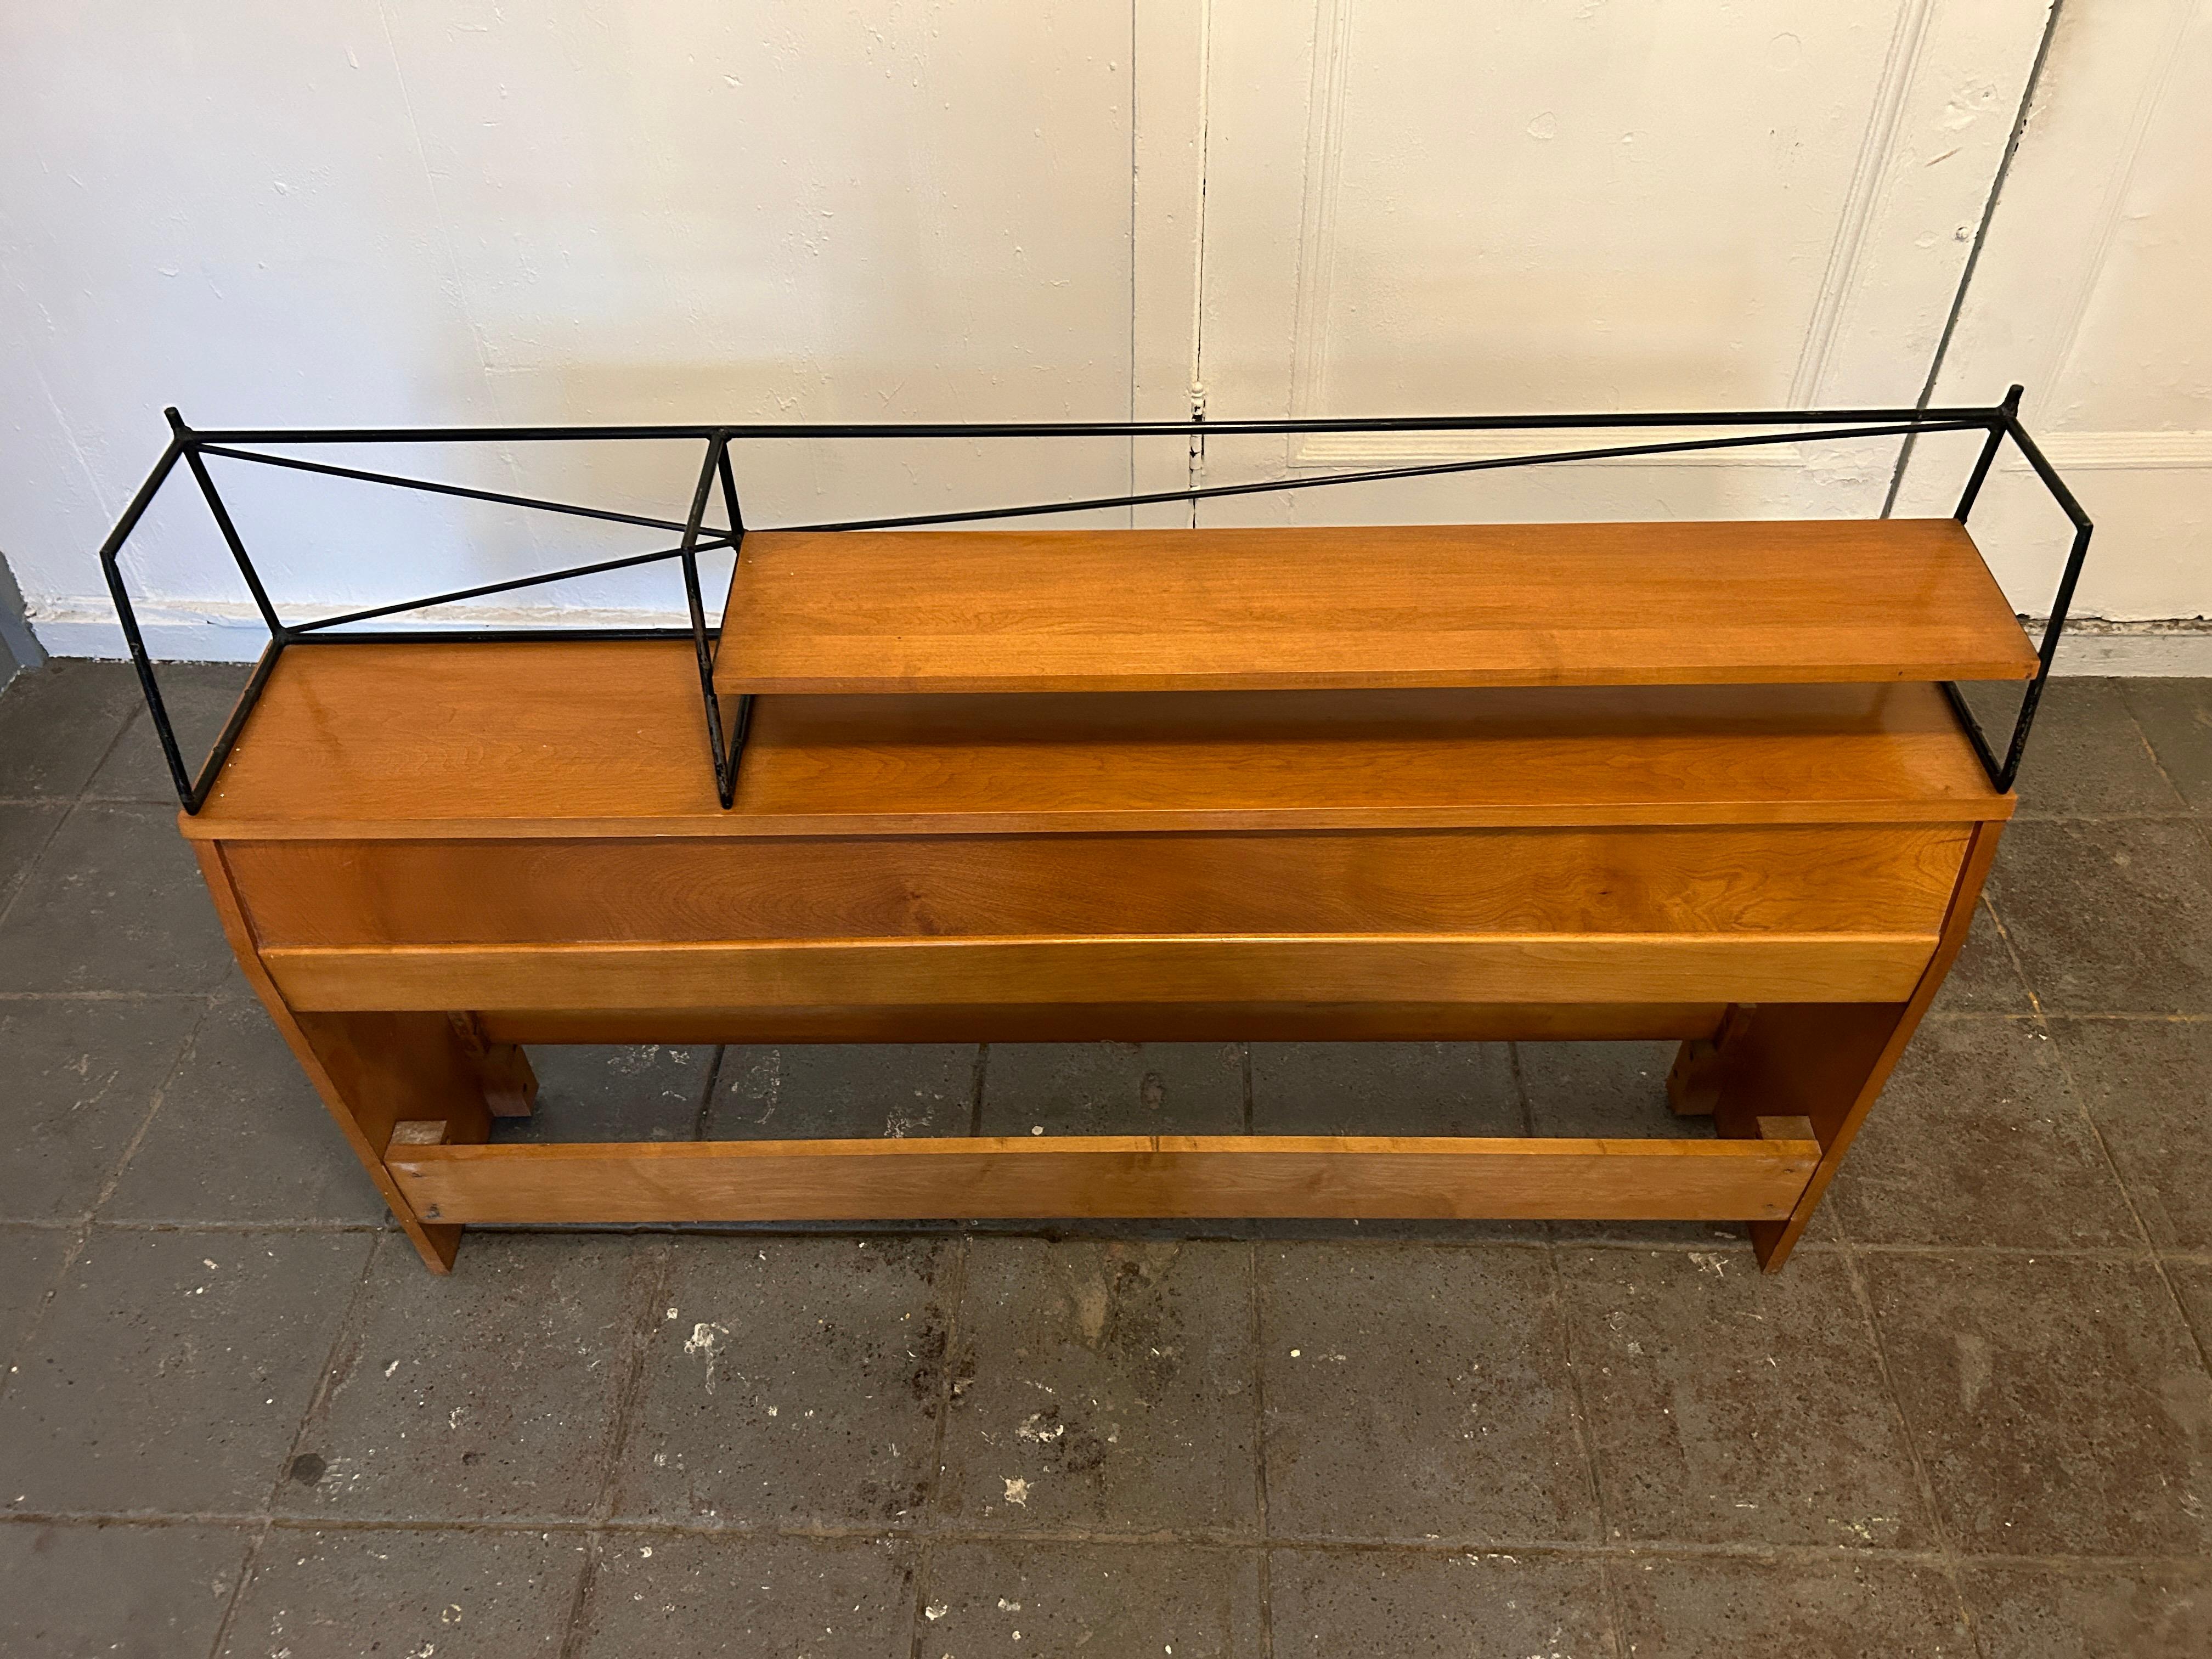 Rare Mid-Century Modern Paul Mccobb full bed headboard maple and iron. All solid maple construction, tobacco blonde maple finish, iron details. You are buying 1 headboard. No bed frame included just headboard. Labeled Planner Group Paul Mccobb.